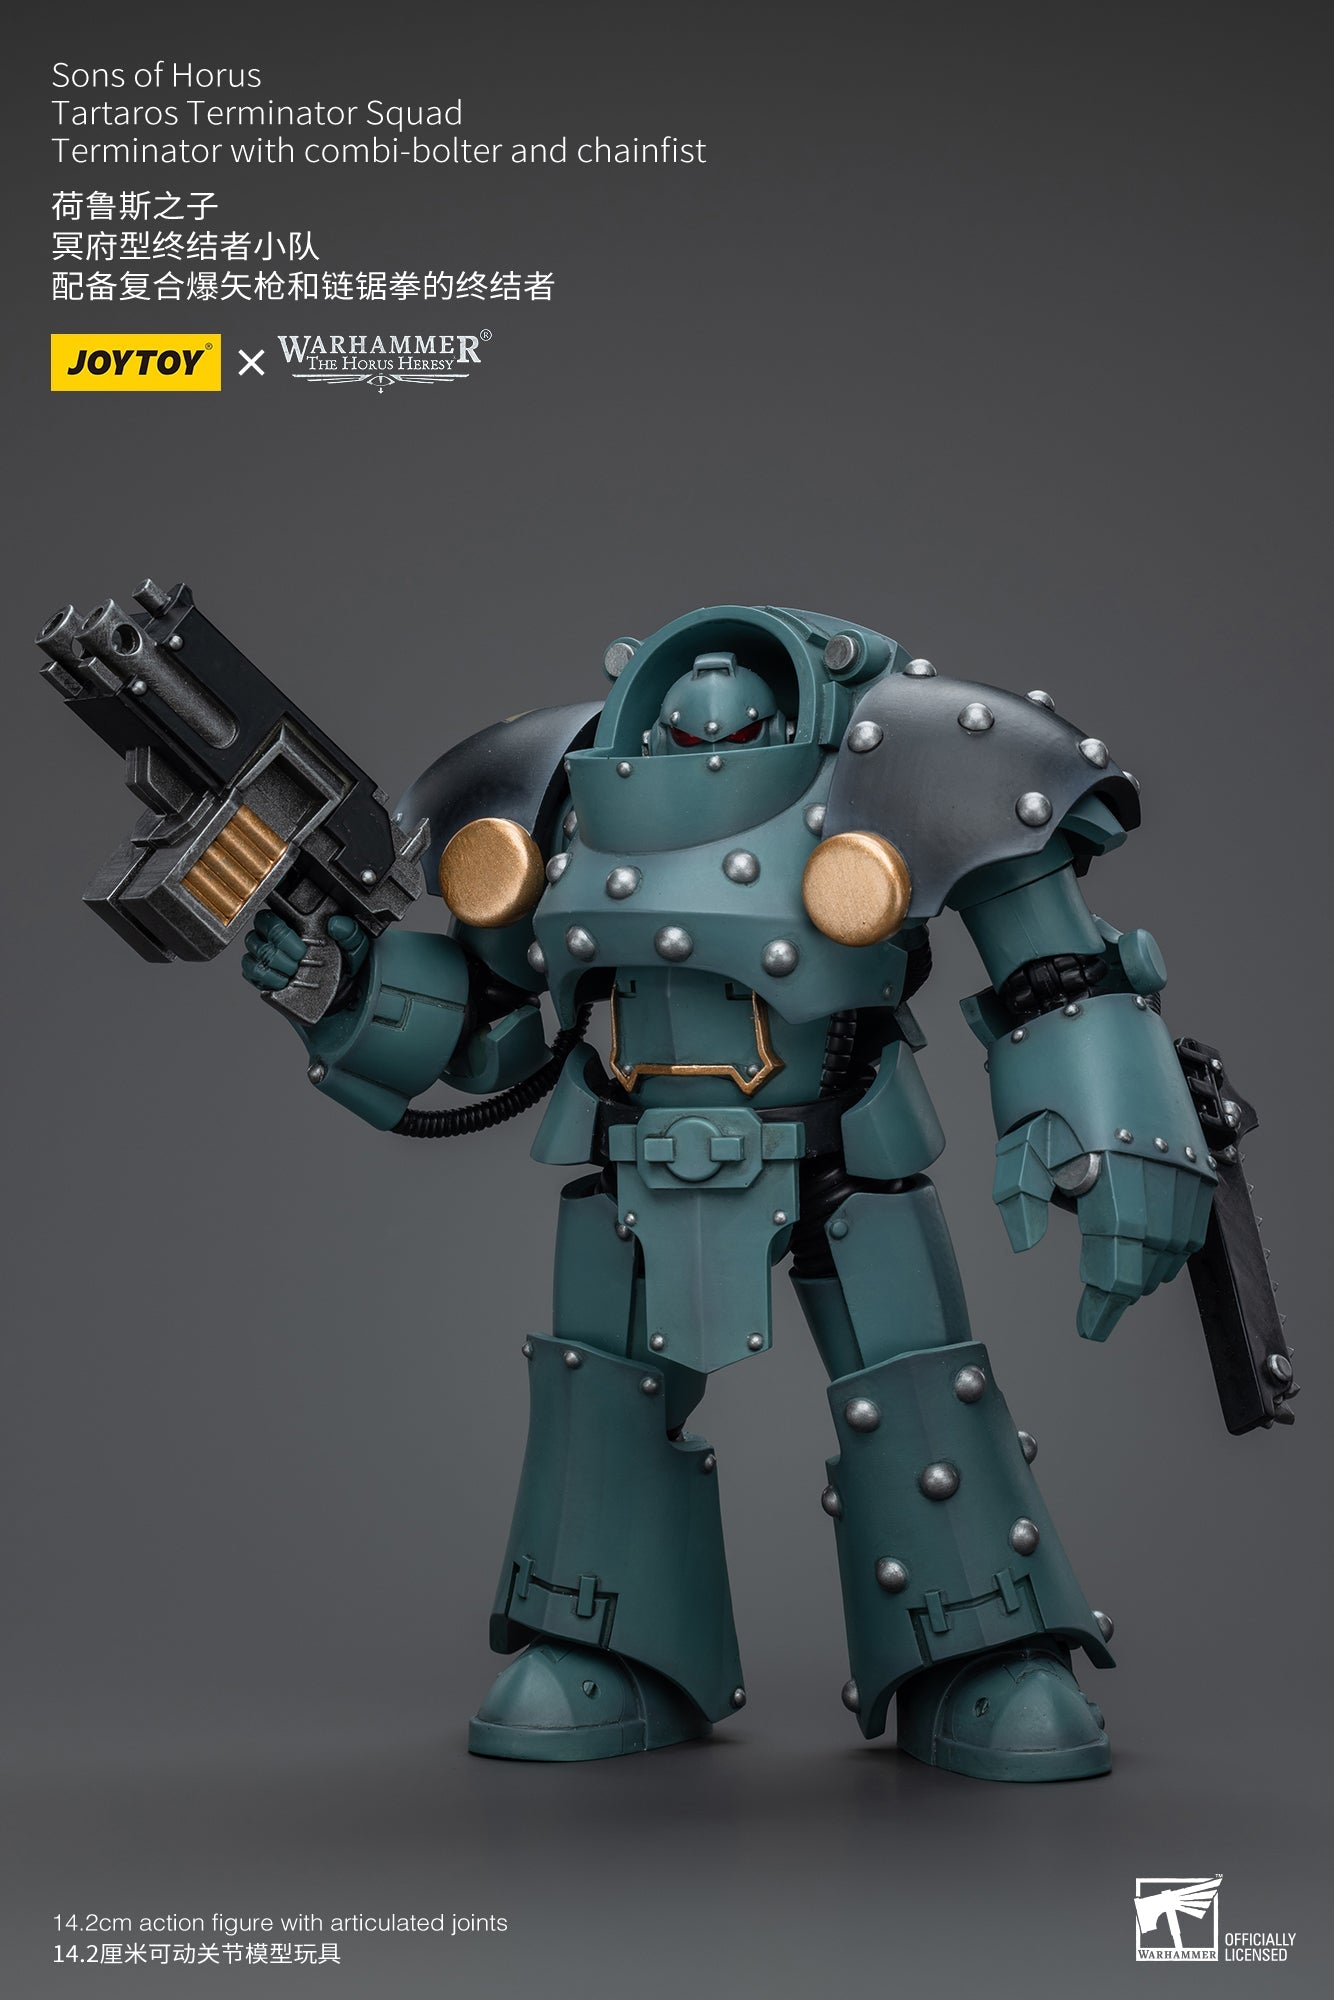 Warhammer The Horus Heresy: Sons Of Horus: Tartaros Terminator Squad Terminator With Combi-Bolter And Chainfist Joy Toy